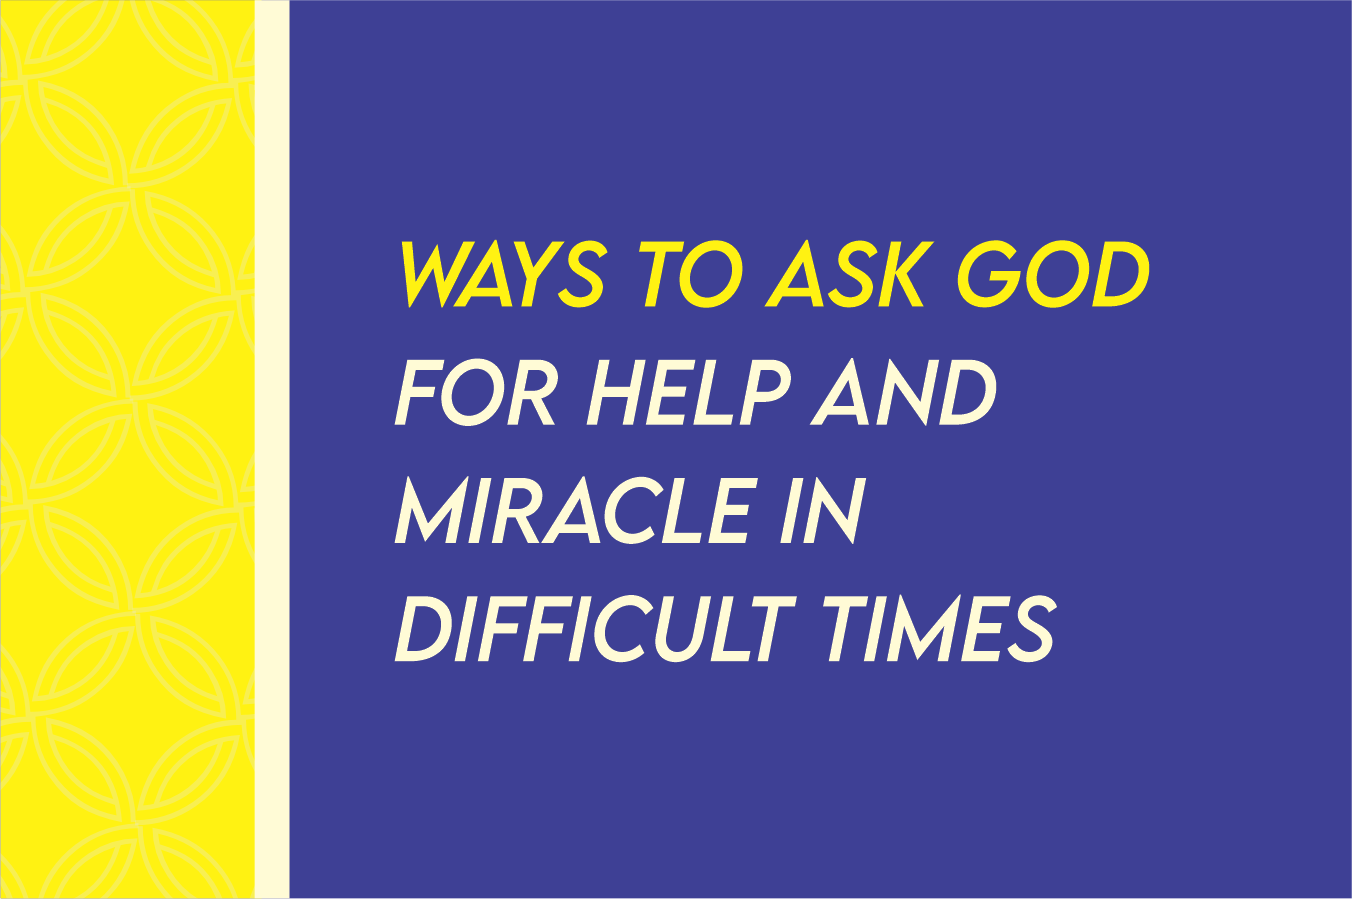 How Do You Pray To God For Help?